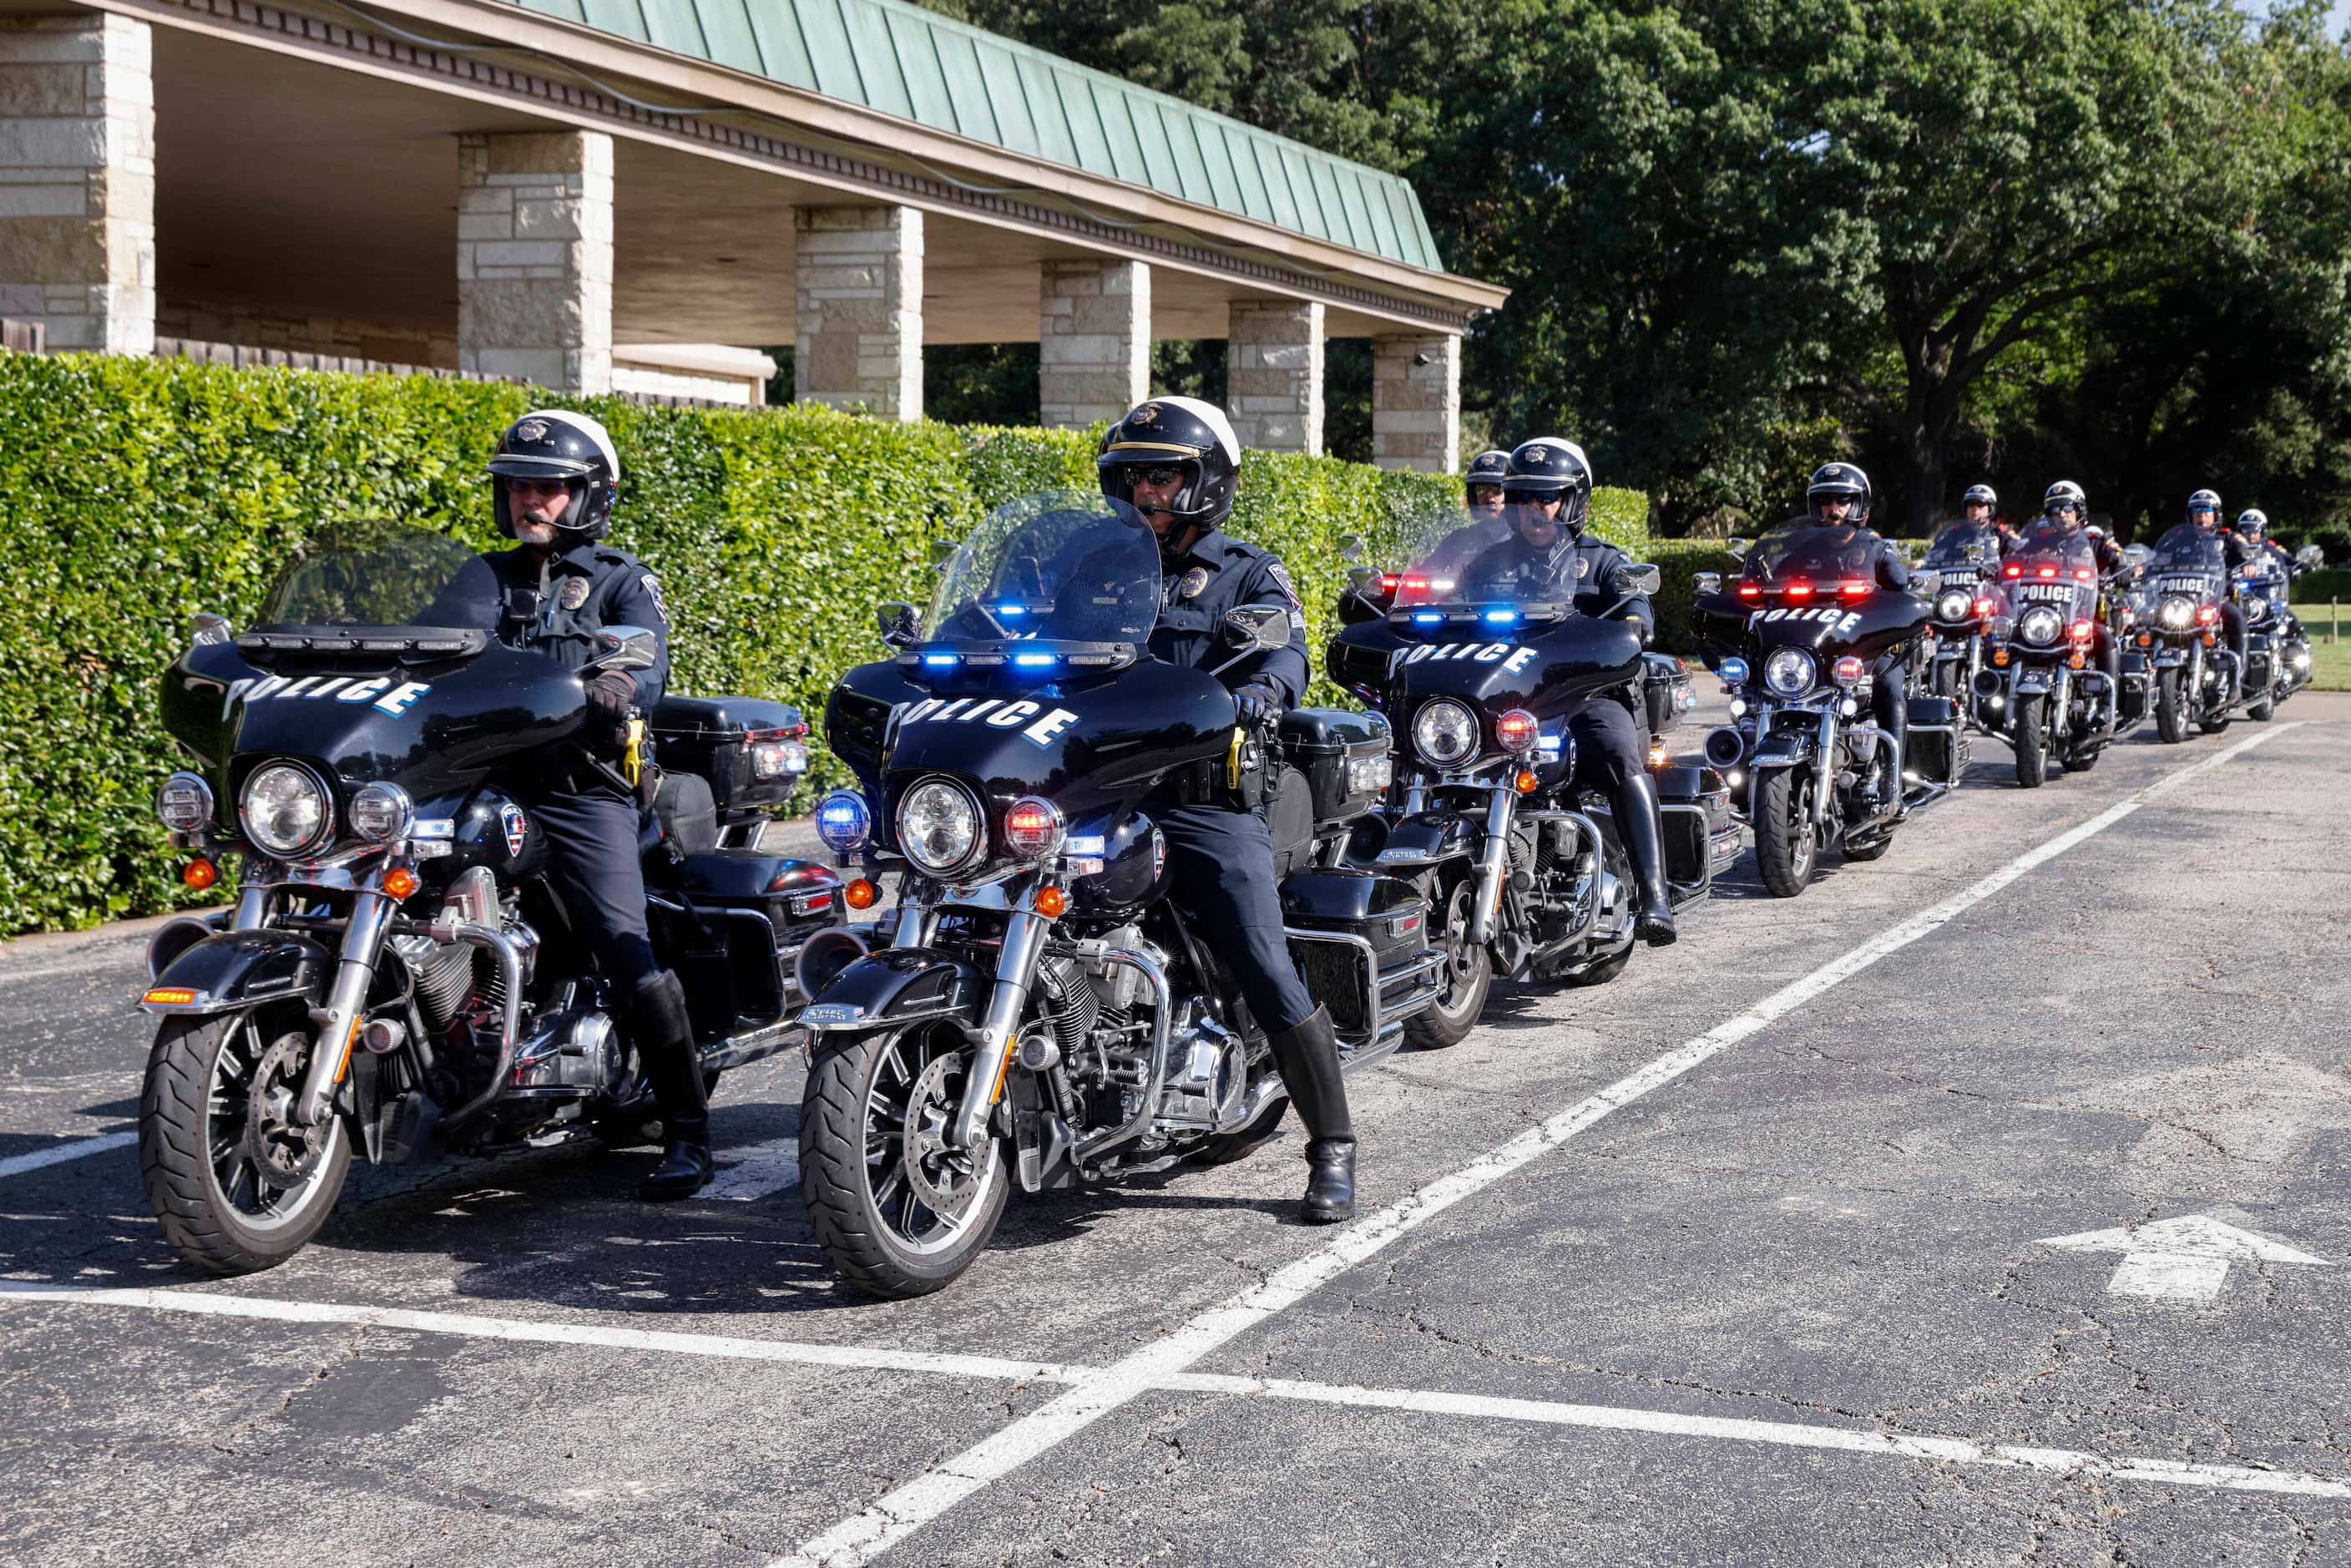 Motorcycle police officers arrive as part of a processional for a funeral service for former...